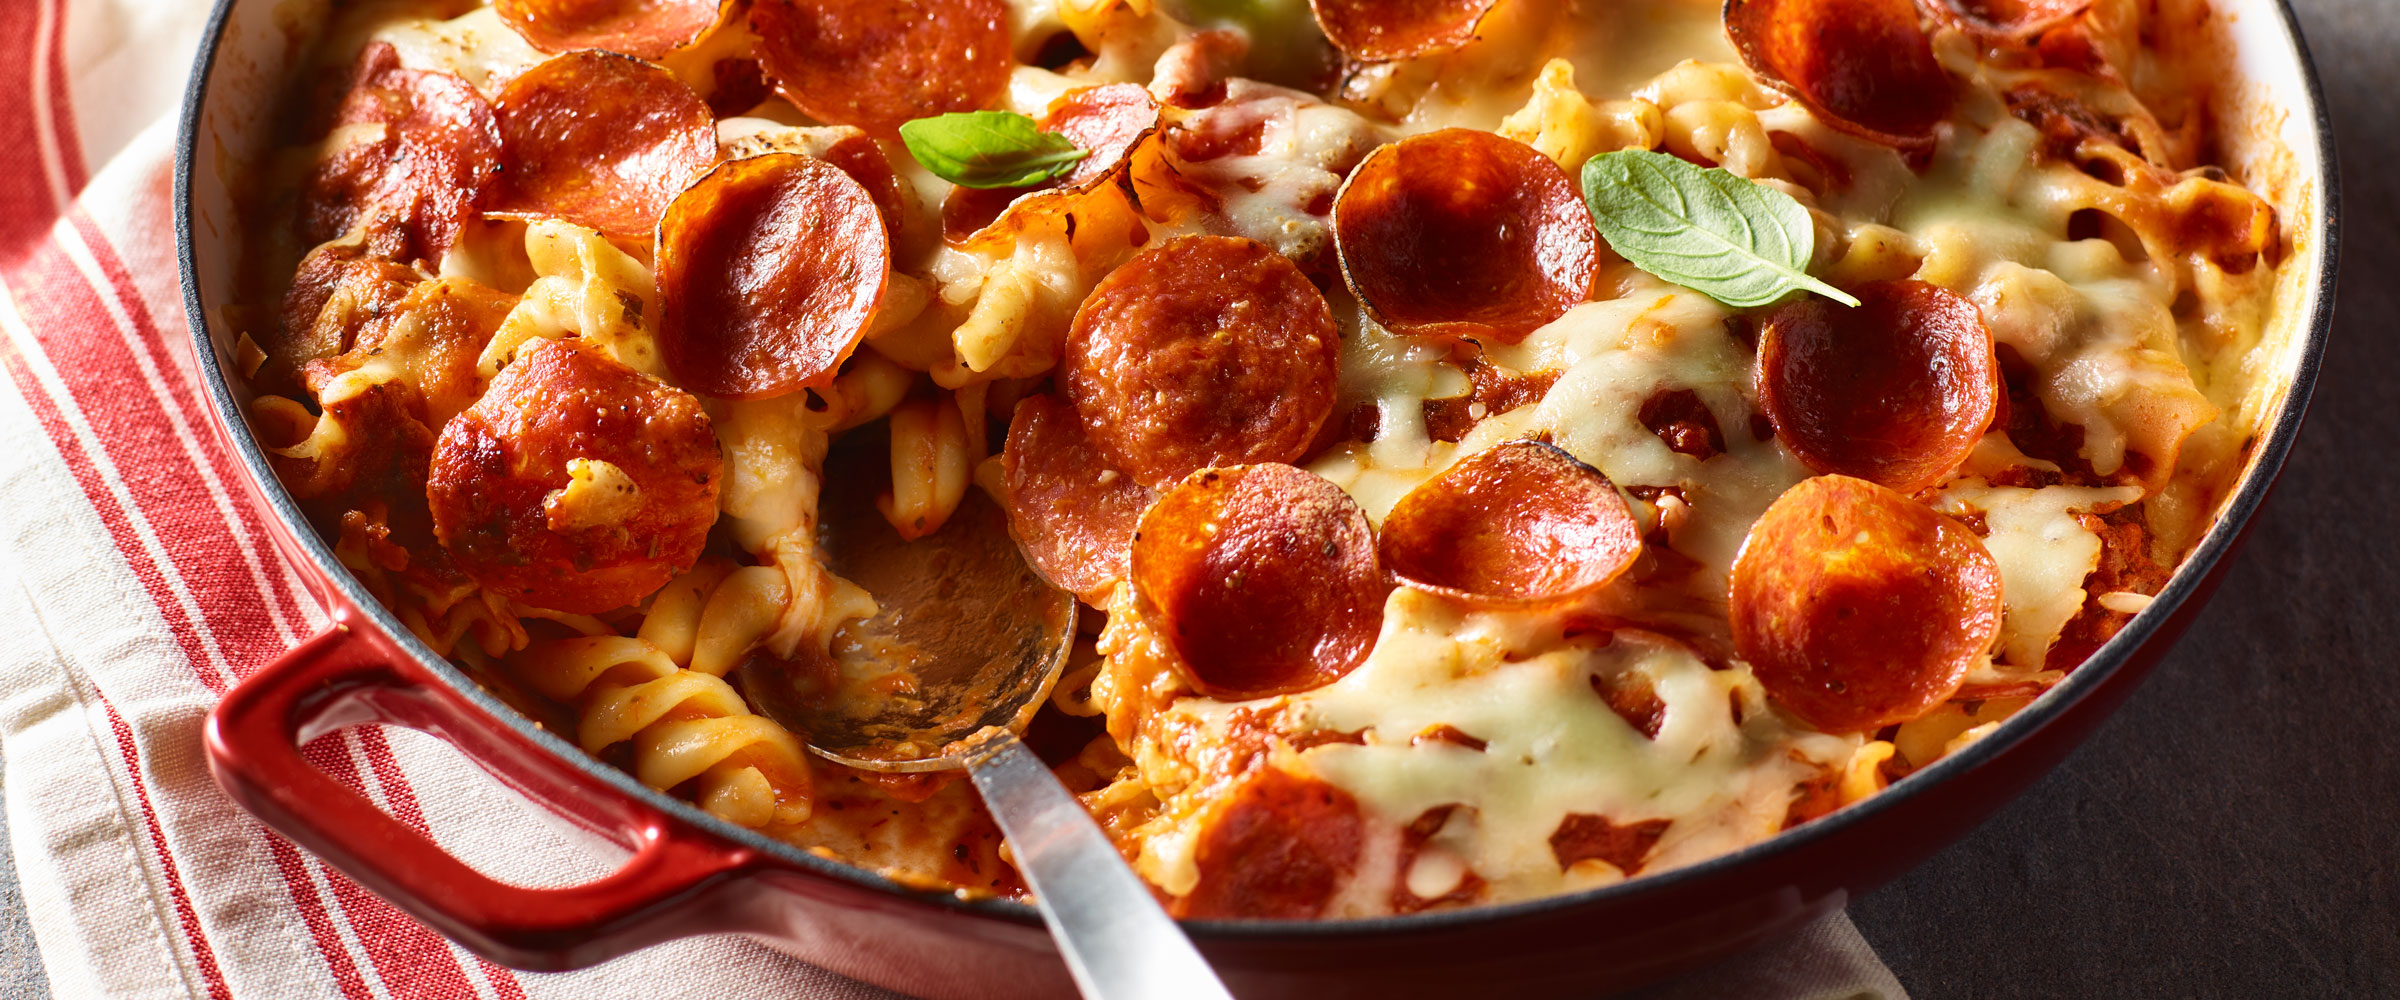 Pepperoni Pizza Pasta Bake in skillet on red and white linen